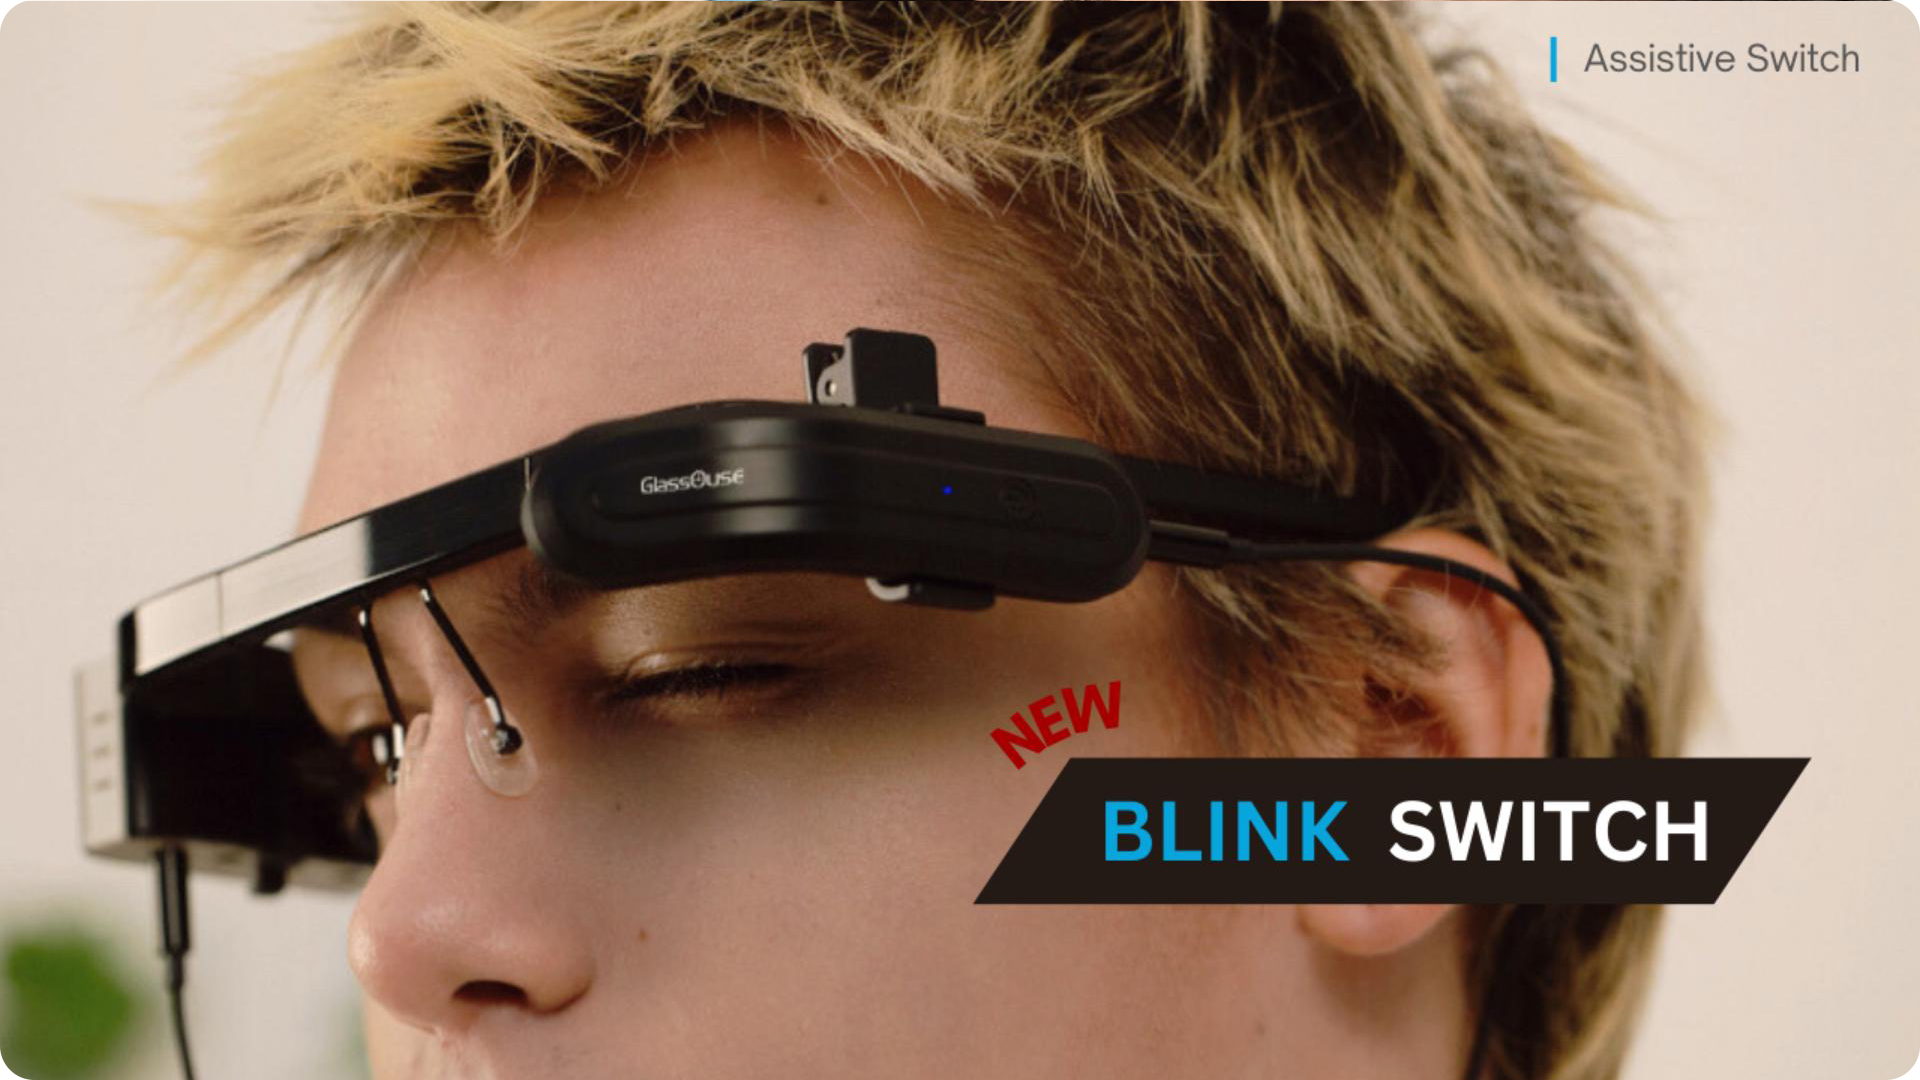 blink-switch-video-posture